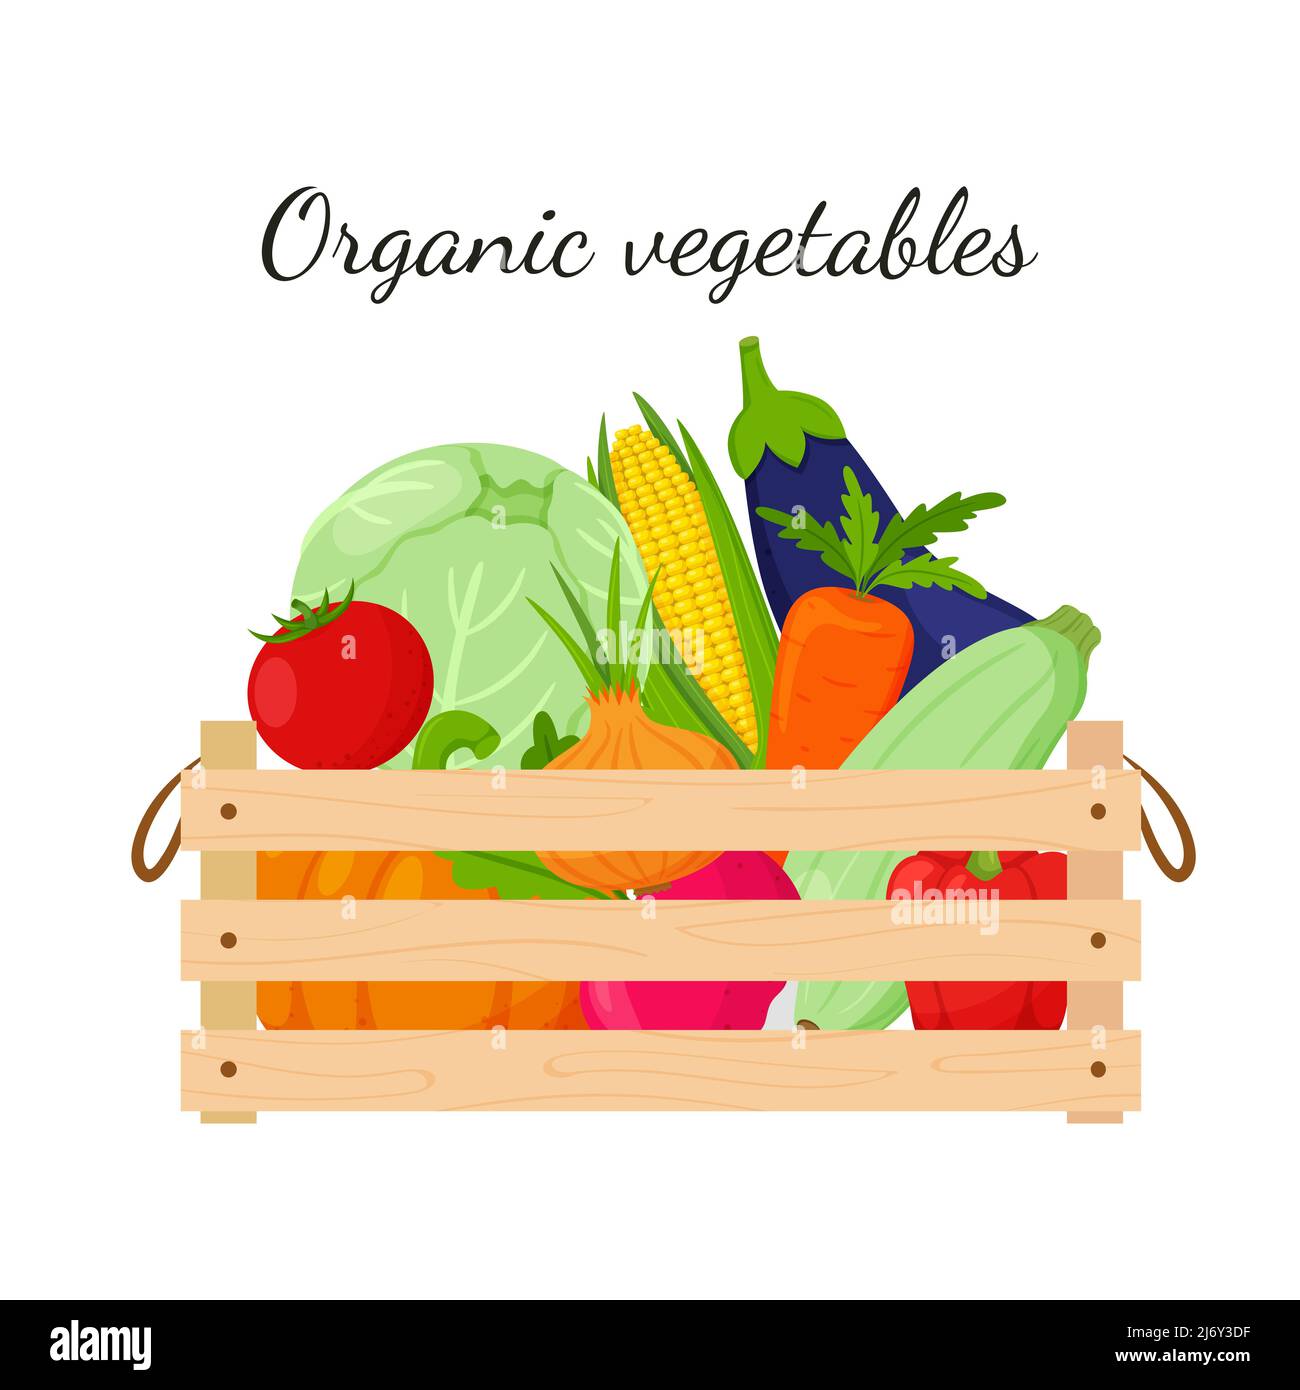 A wooden box full of vegetables, pumpkin, corn, carrots, beets, eggplant, zucchini, cabbage. Natural, organic food. The concept of growing your own ve Stock Vector